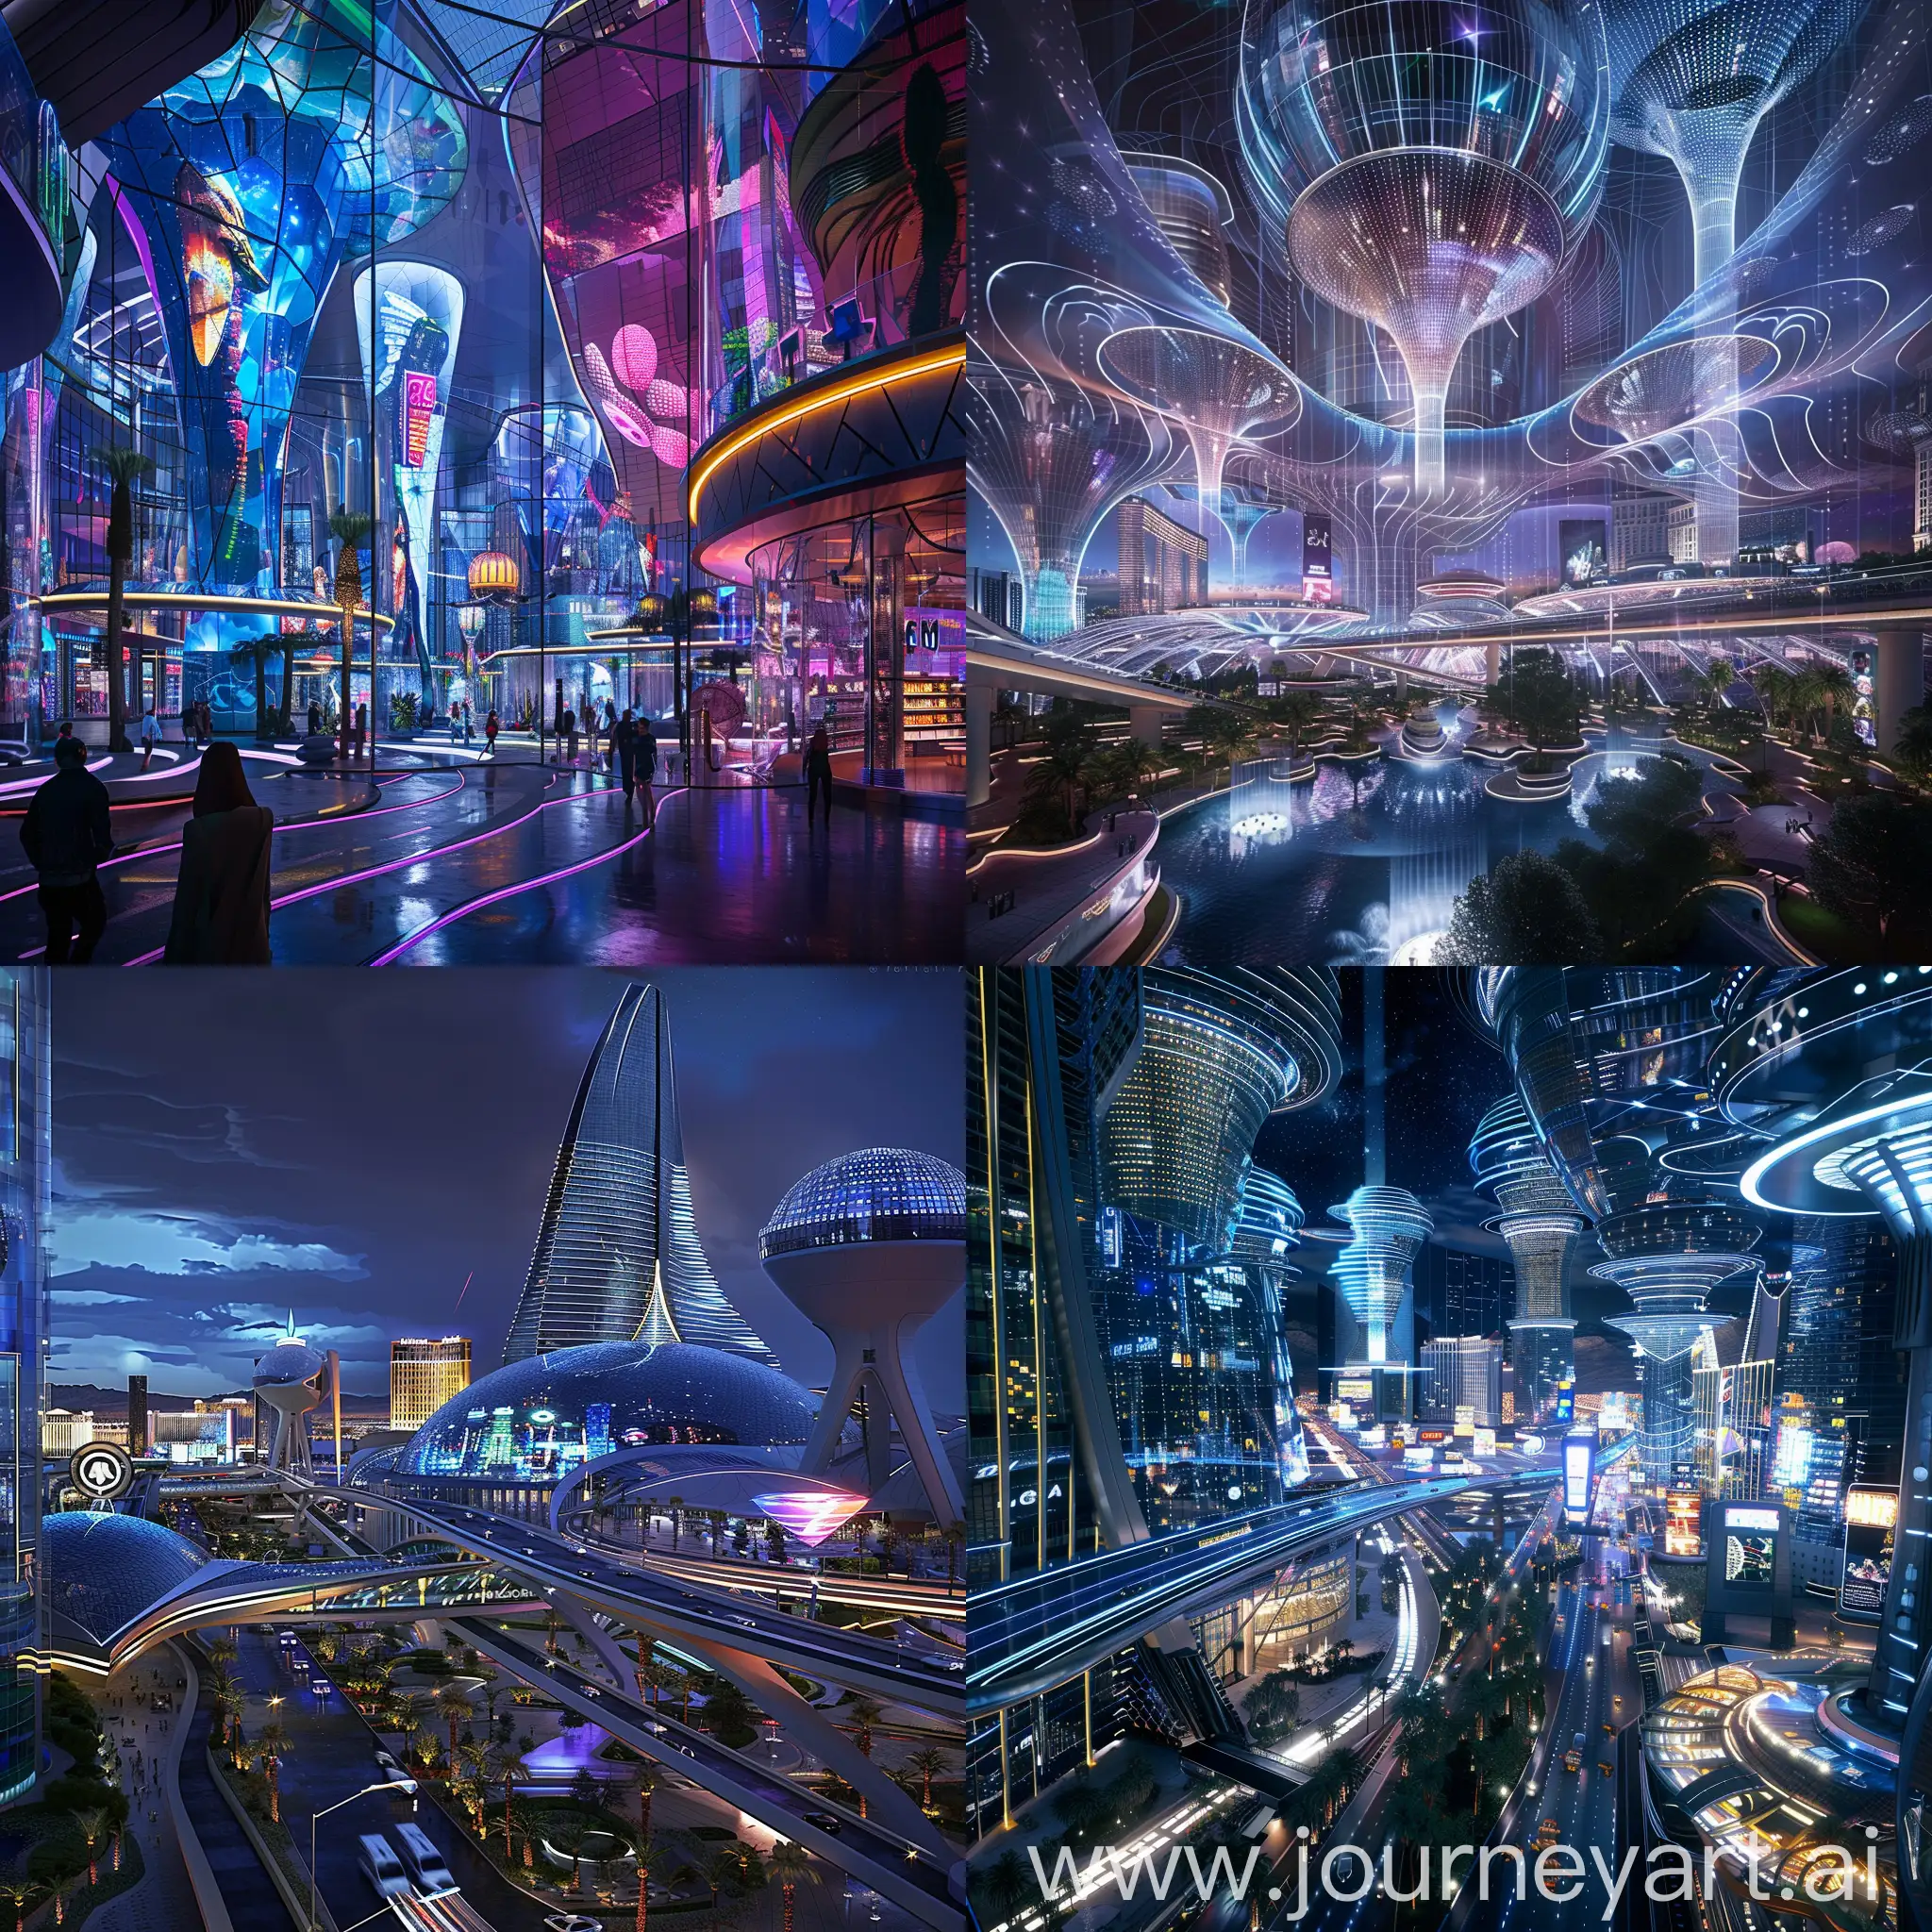 Sci-Fi Las Vegas, Advanced Science And Technology, Smart Glass Skins, Automated Transport Hubs, AI-Managed Infrastructure, Vertical Gardens, Augmented Reality Entertainment, Water Reclamation Systems, Renewable Energy Casinos, Responsive Environments, High-Tech Security Systems, Waste-to-Energy Plants, Interactive Facades, Energy-Generating Walkways, Drone Light Shows, Atmospheric Water Generators, Solar Canopies, Climate Control Domes, Sky Parks, Dynamic Sculptures, Eco-Friendly Transport Lanes, Architectural Light Beams, In Unreal Engine 5 Style --stylize 1000